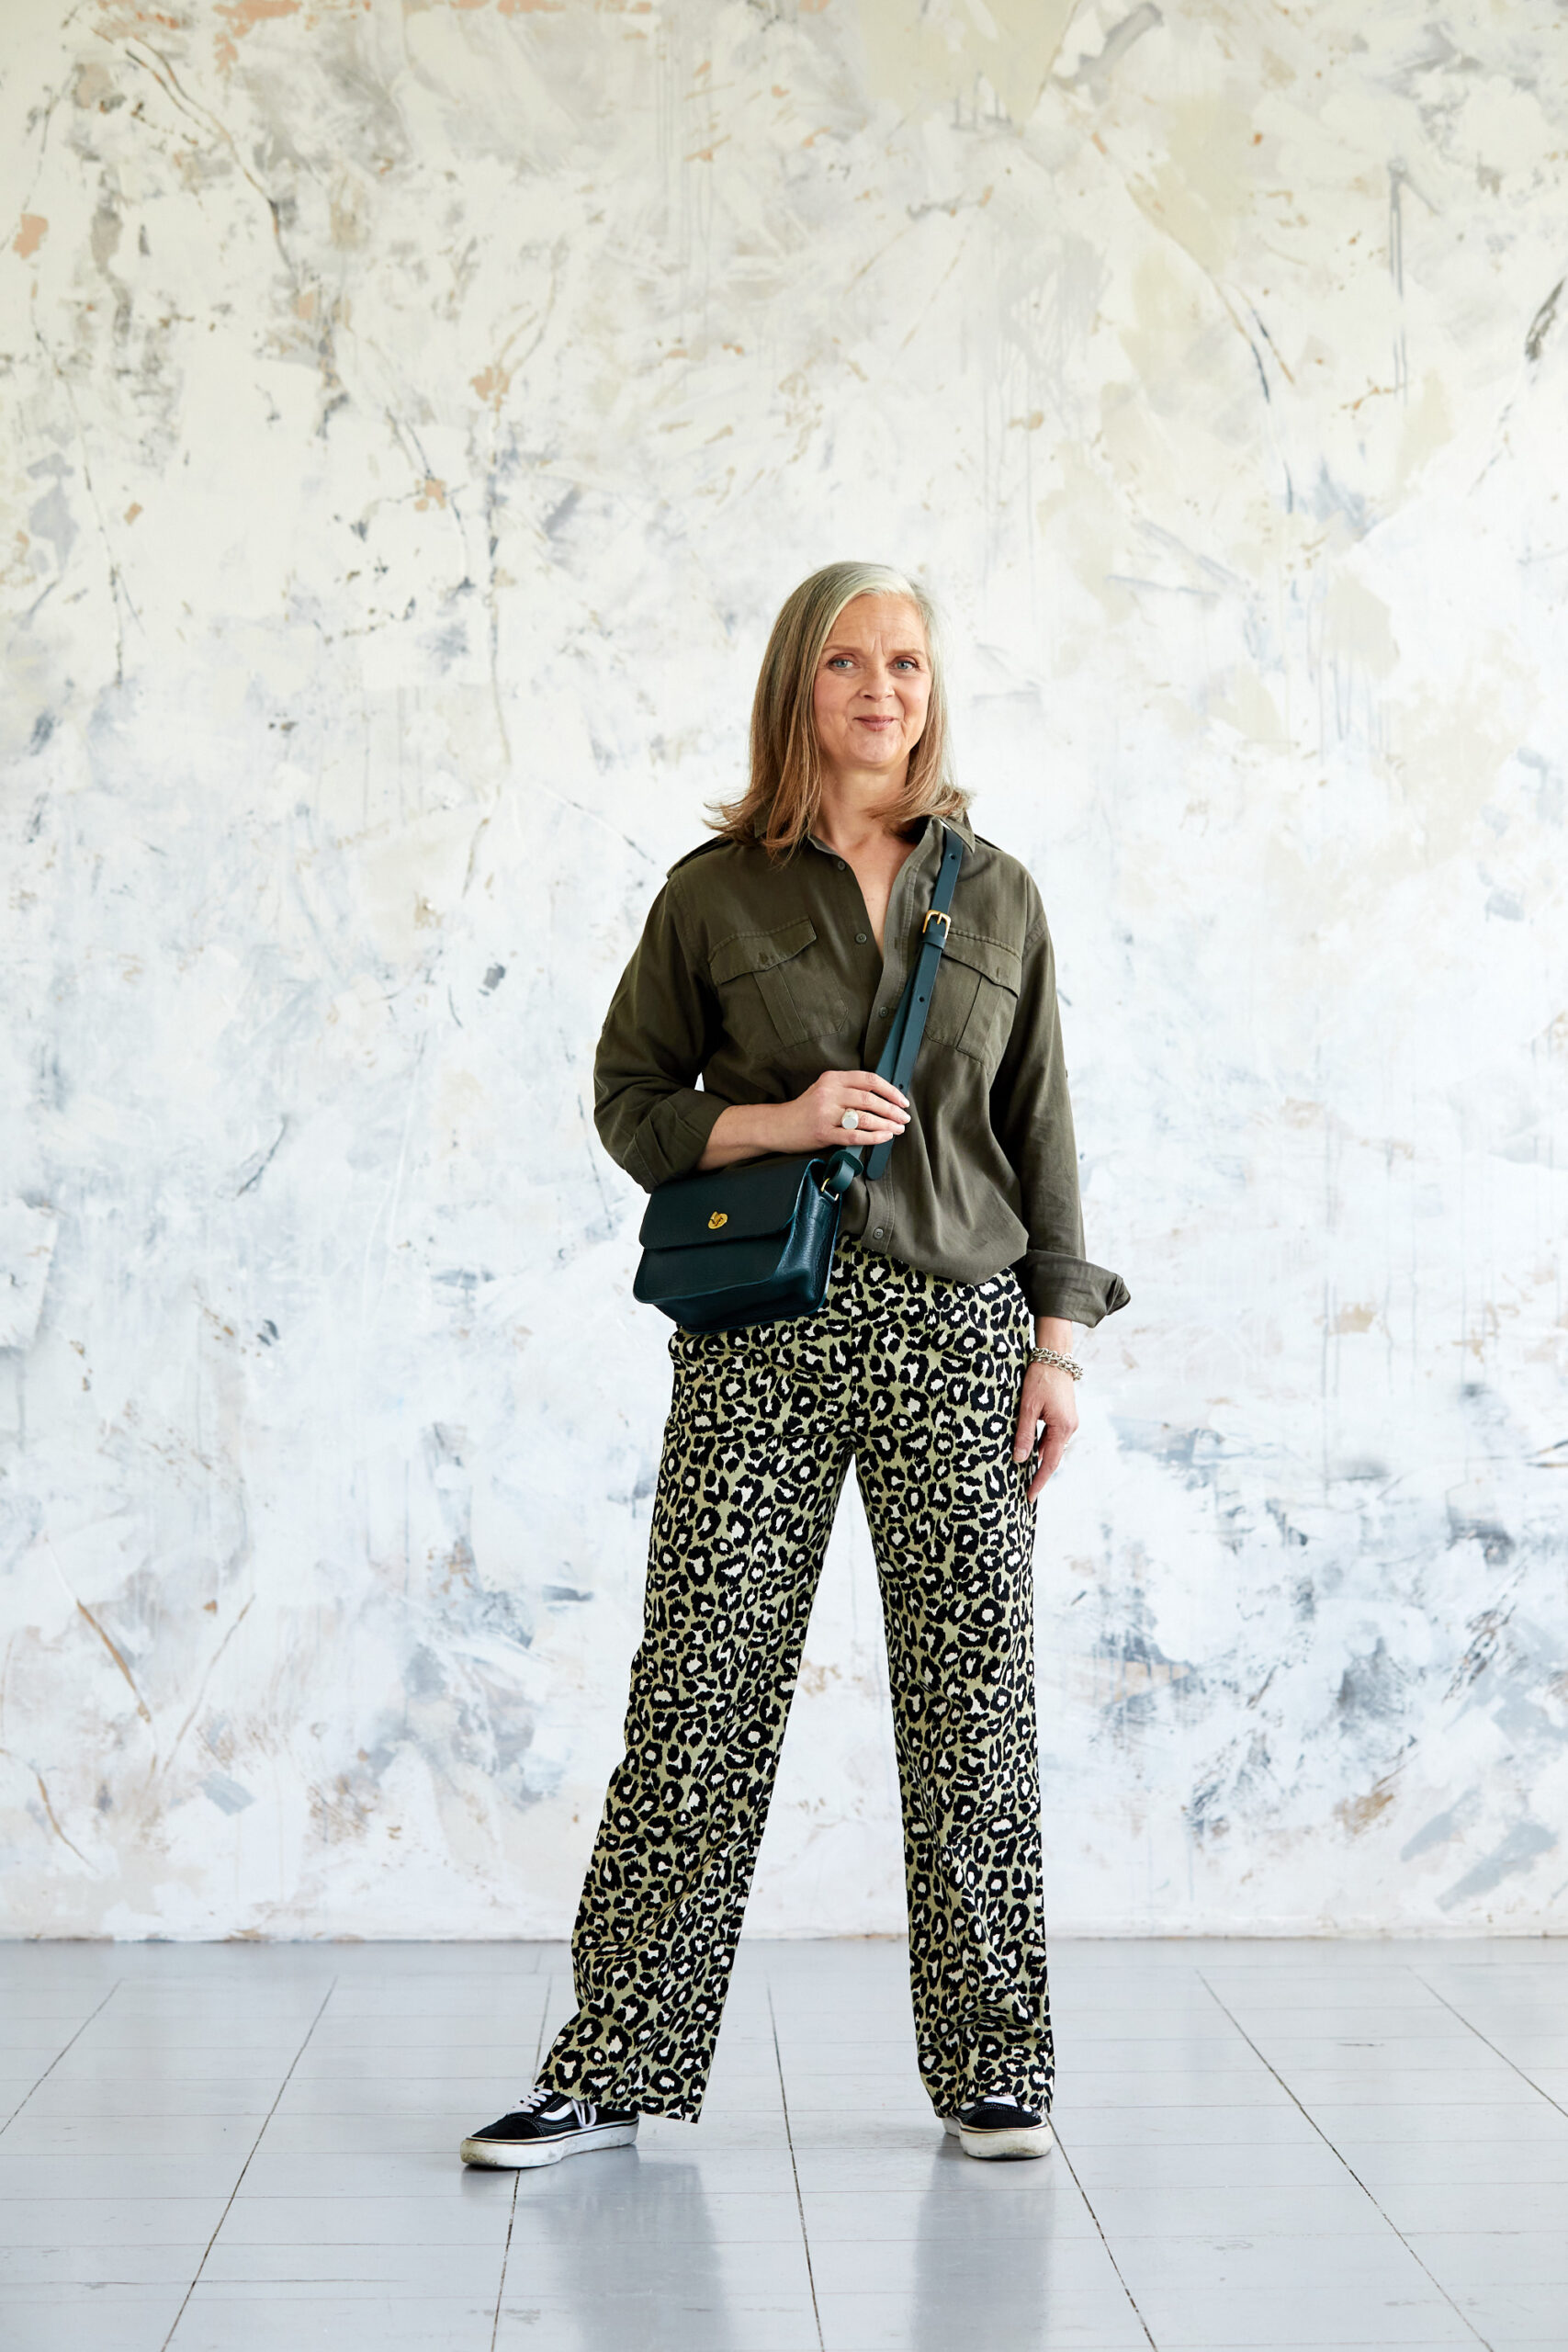 Here is How to Style Your Leopard Print Pants for Work